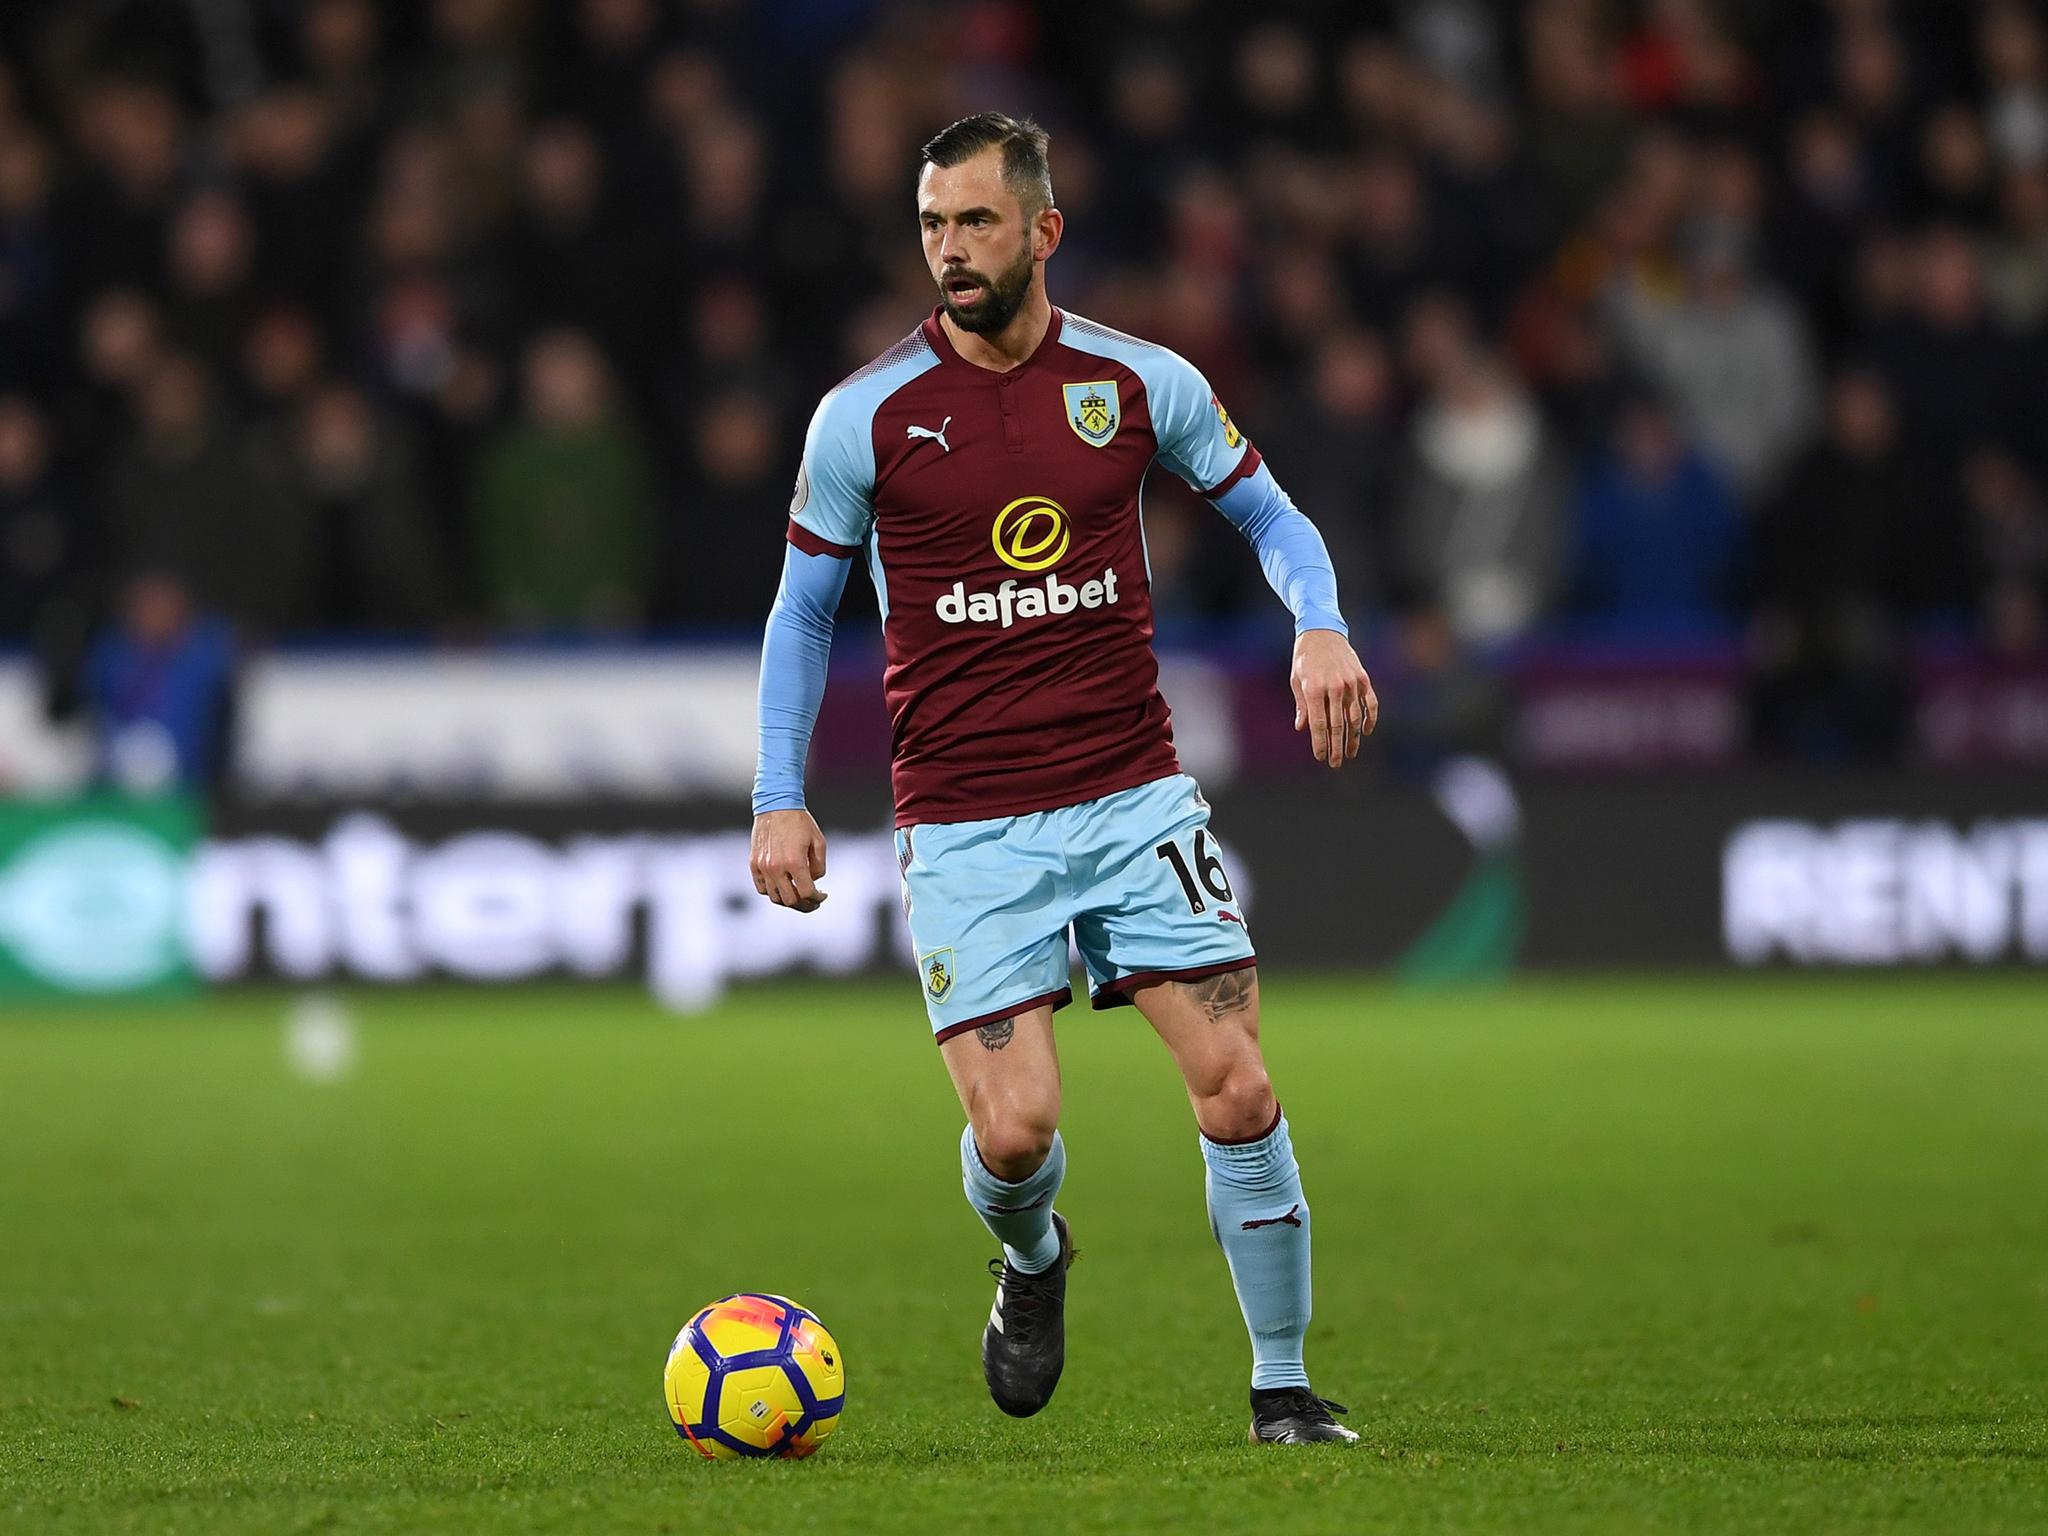 Steven Defour could miss the rest of the season after suffering a knee injury that needs surgery